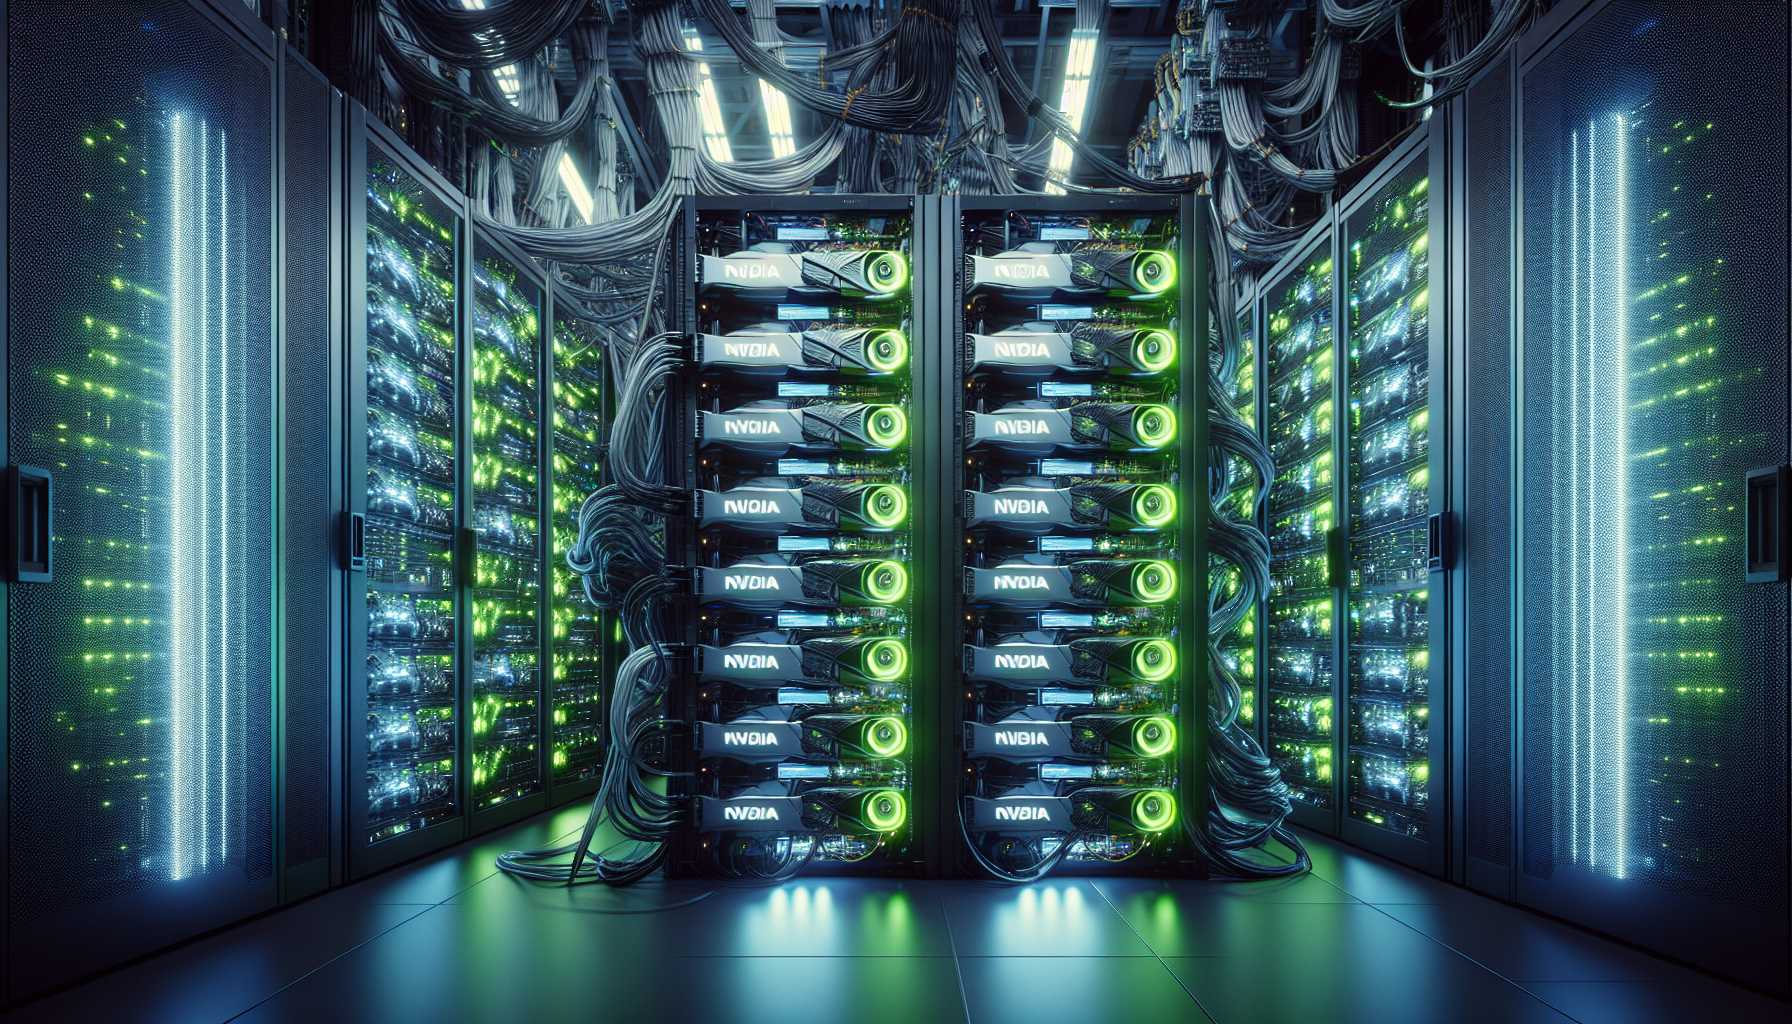 Nvidia GPUs being used in an AI supercomputer setup